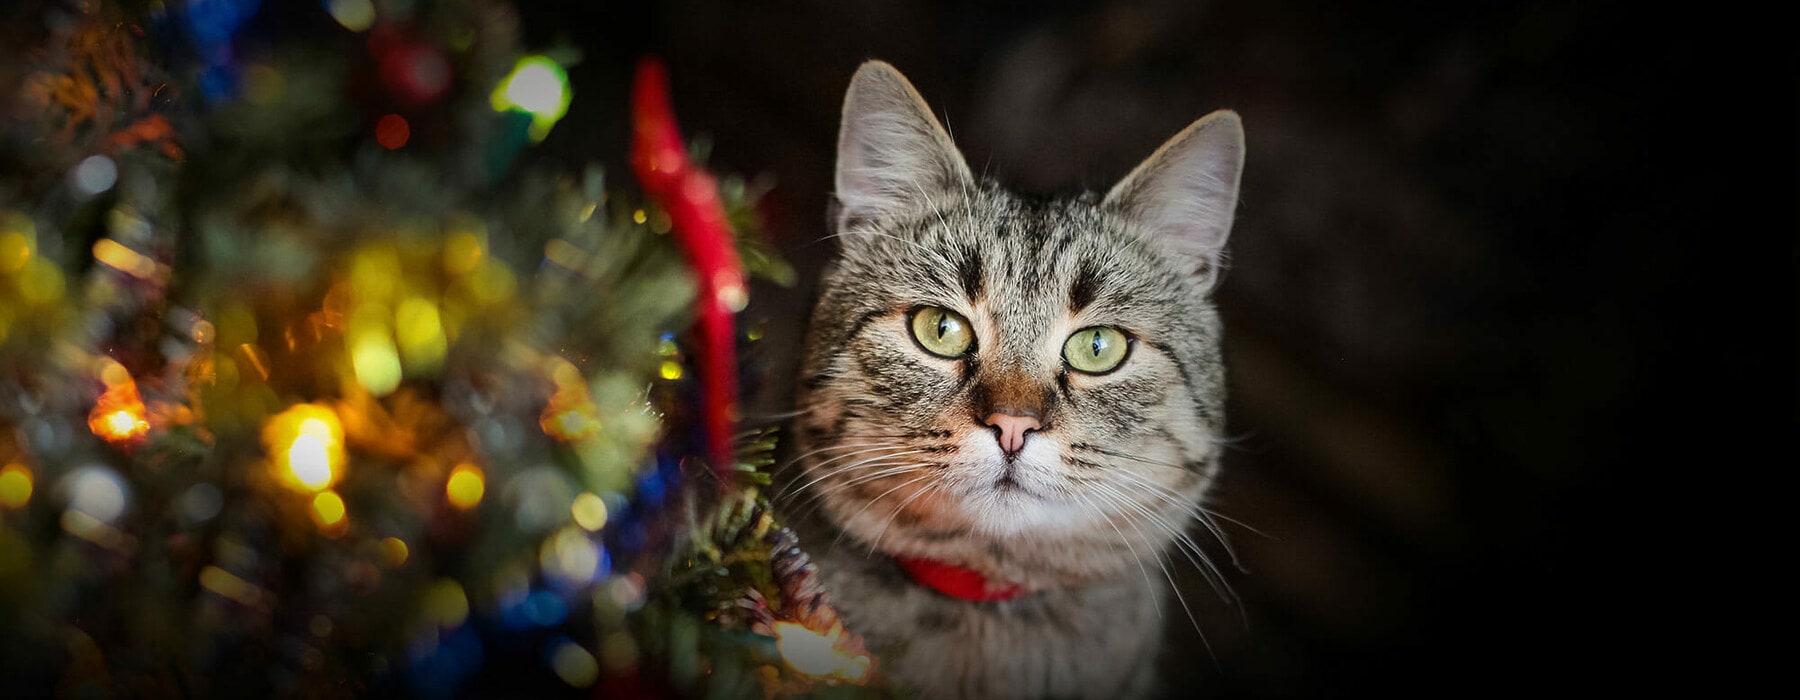 Close-Up Portrait Of Cat On Christmas Tree